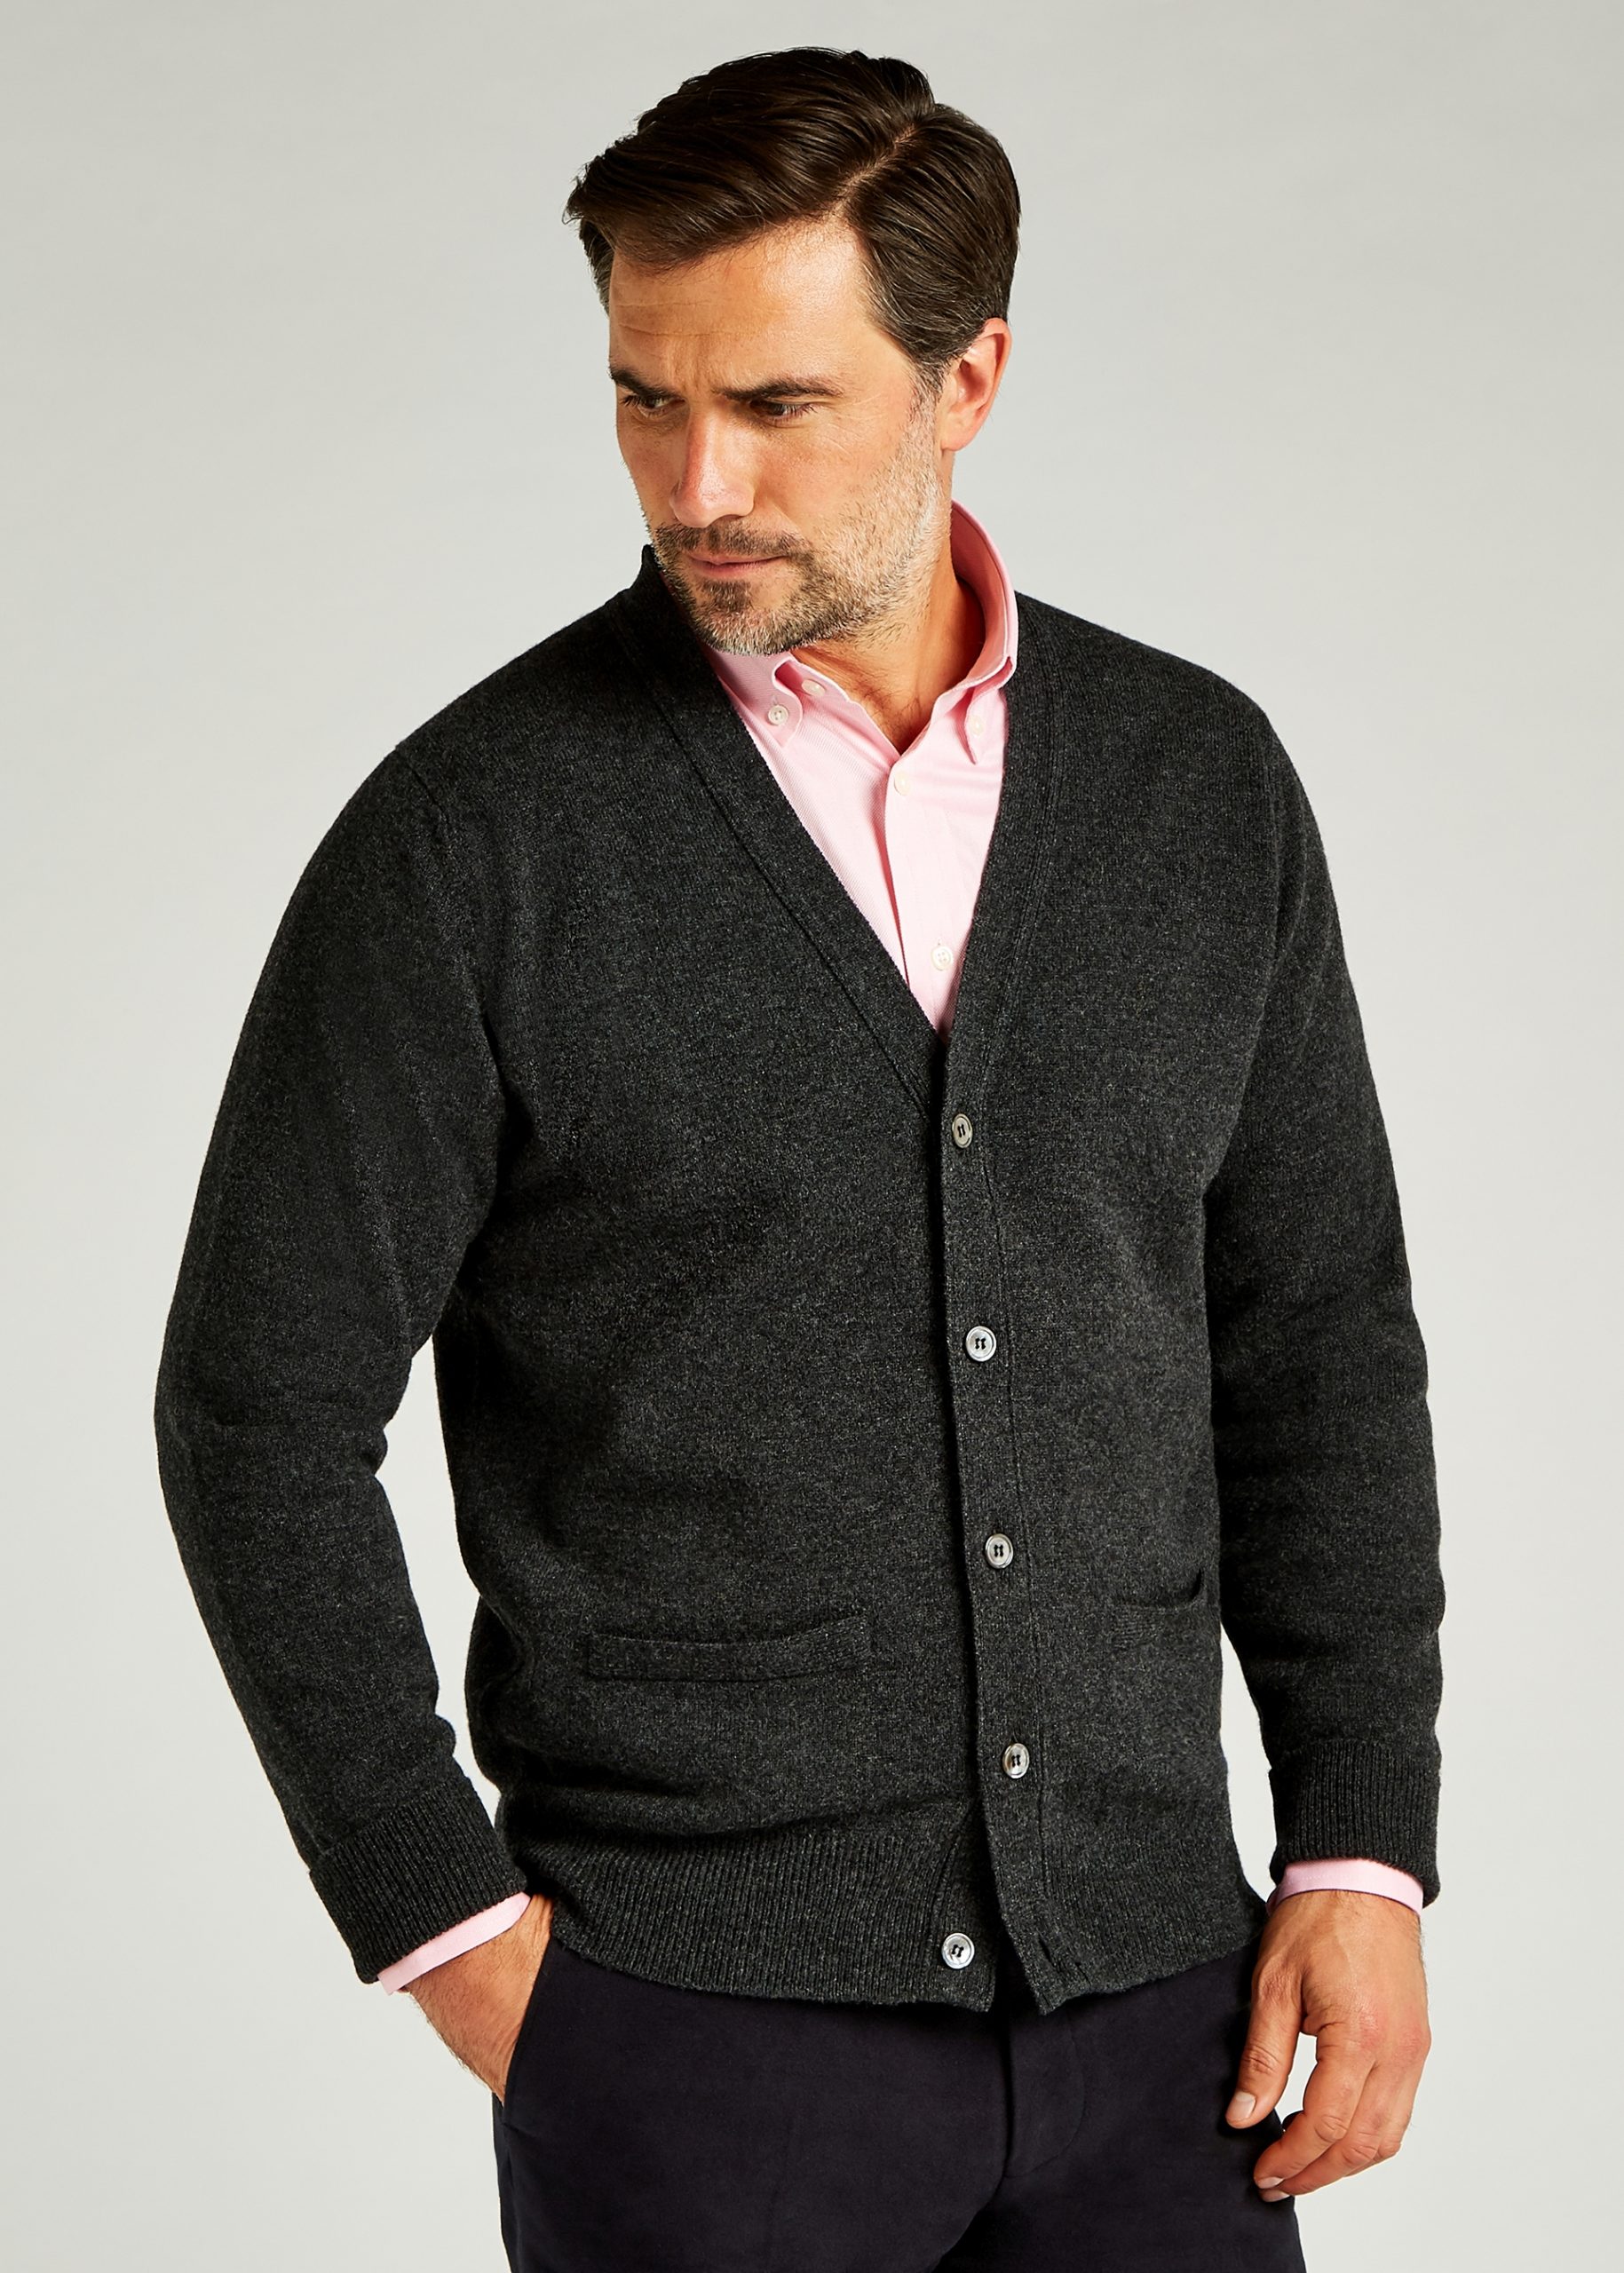 Roderick Charles lambswool cardigan with three button front in charcoal grey